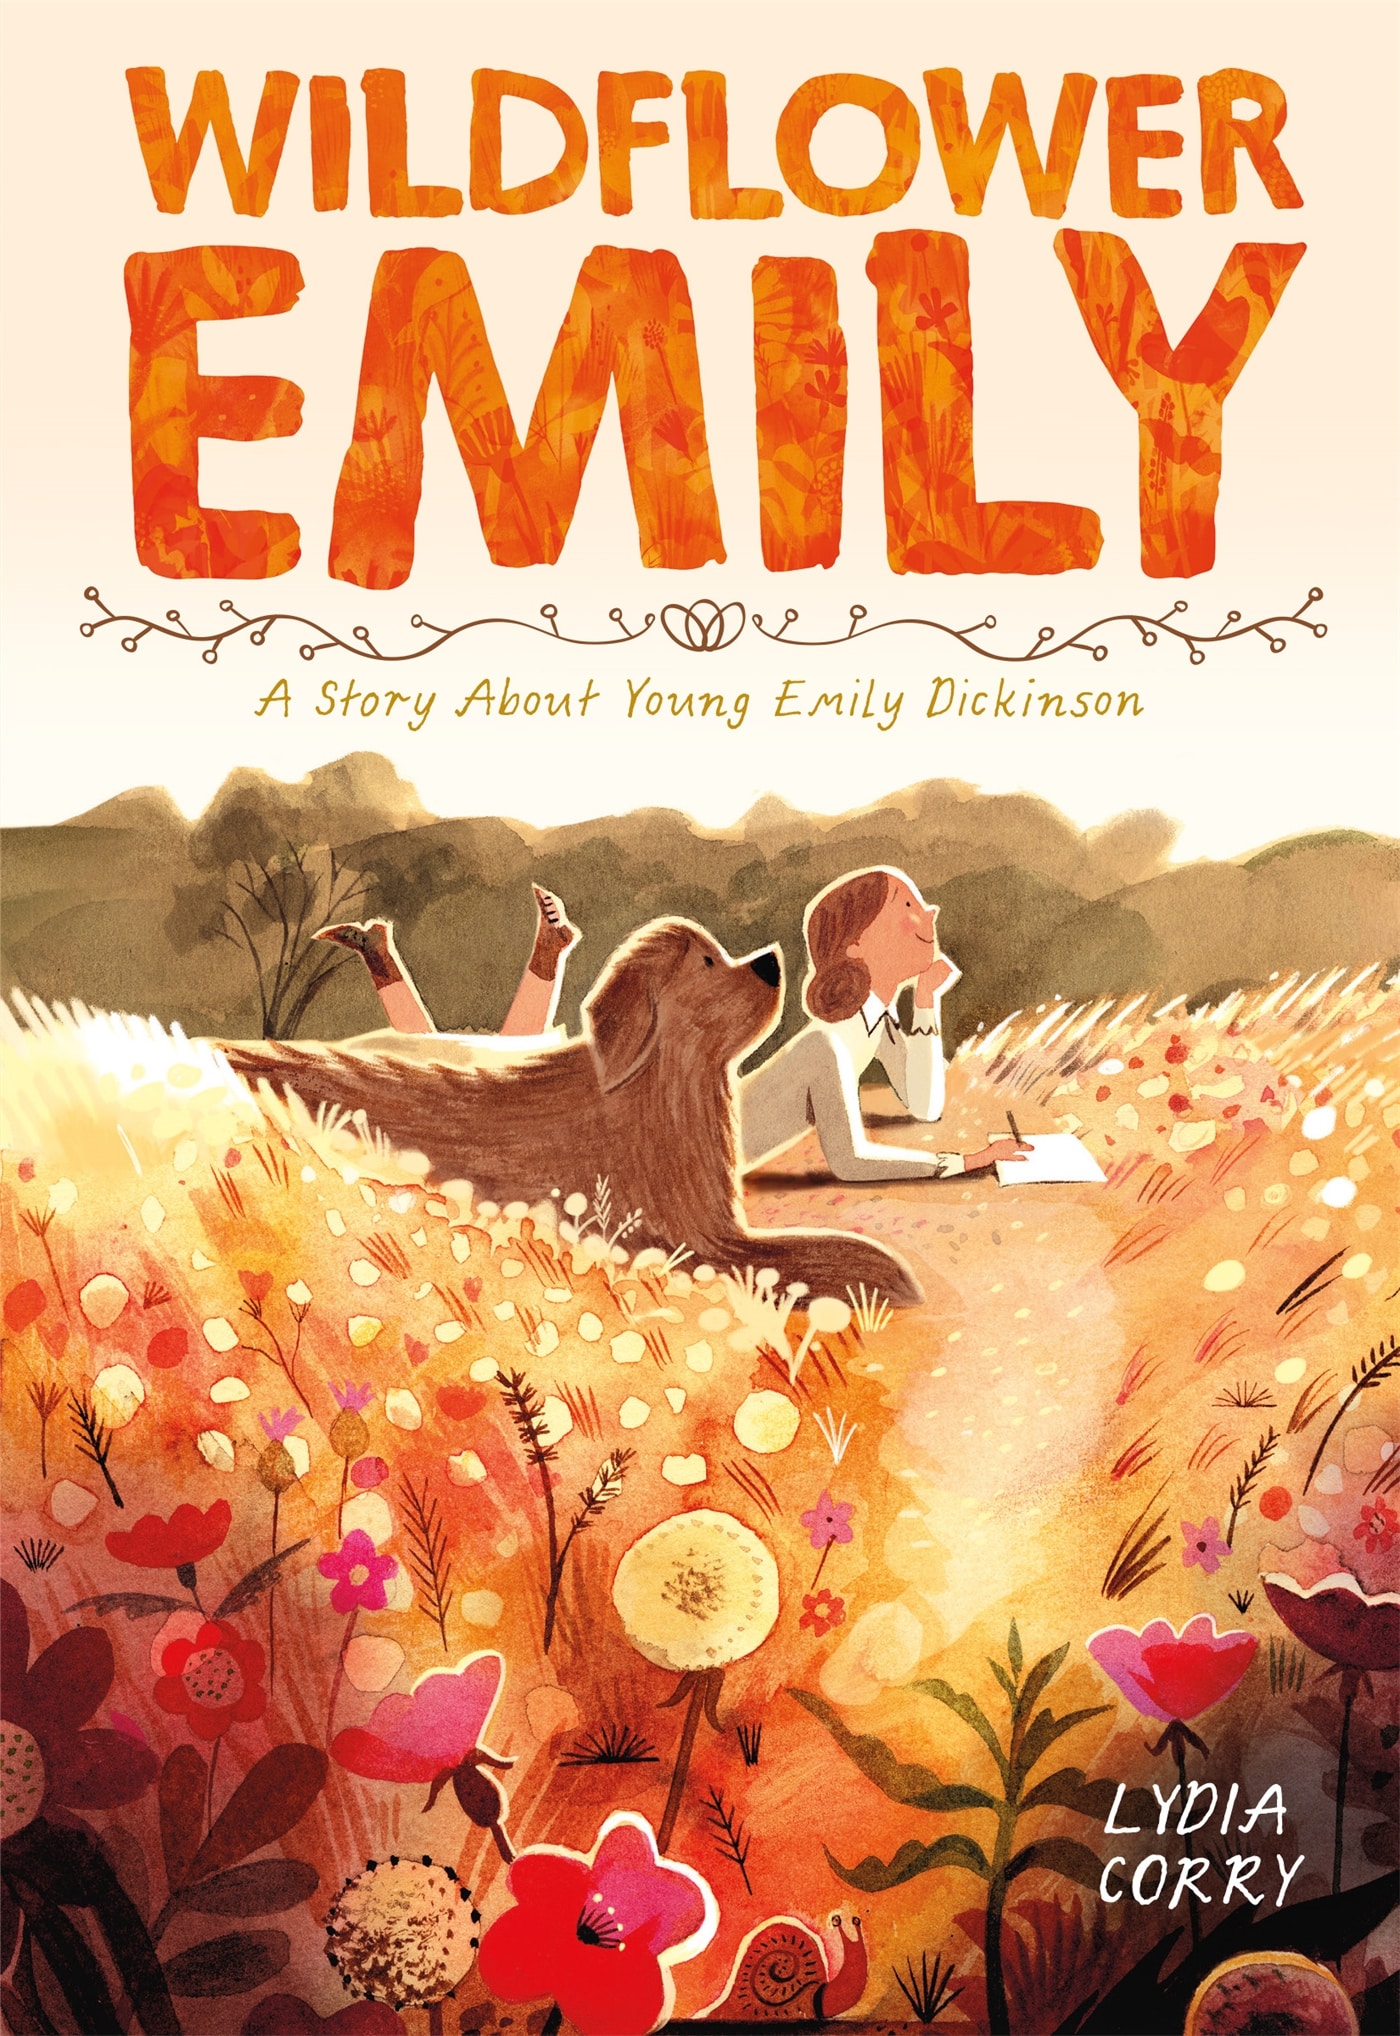 Text reads "Wildflower Emily" and image depicts girl and her dog in a field of flowers. From First Second